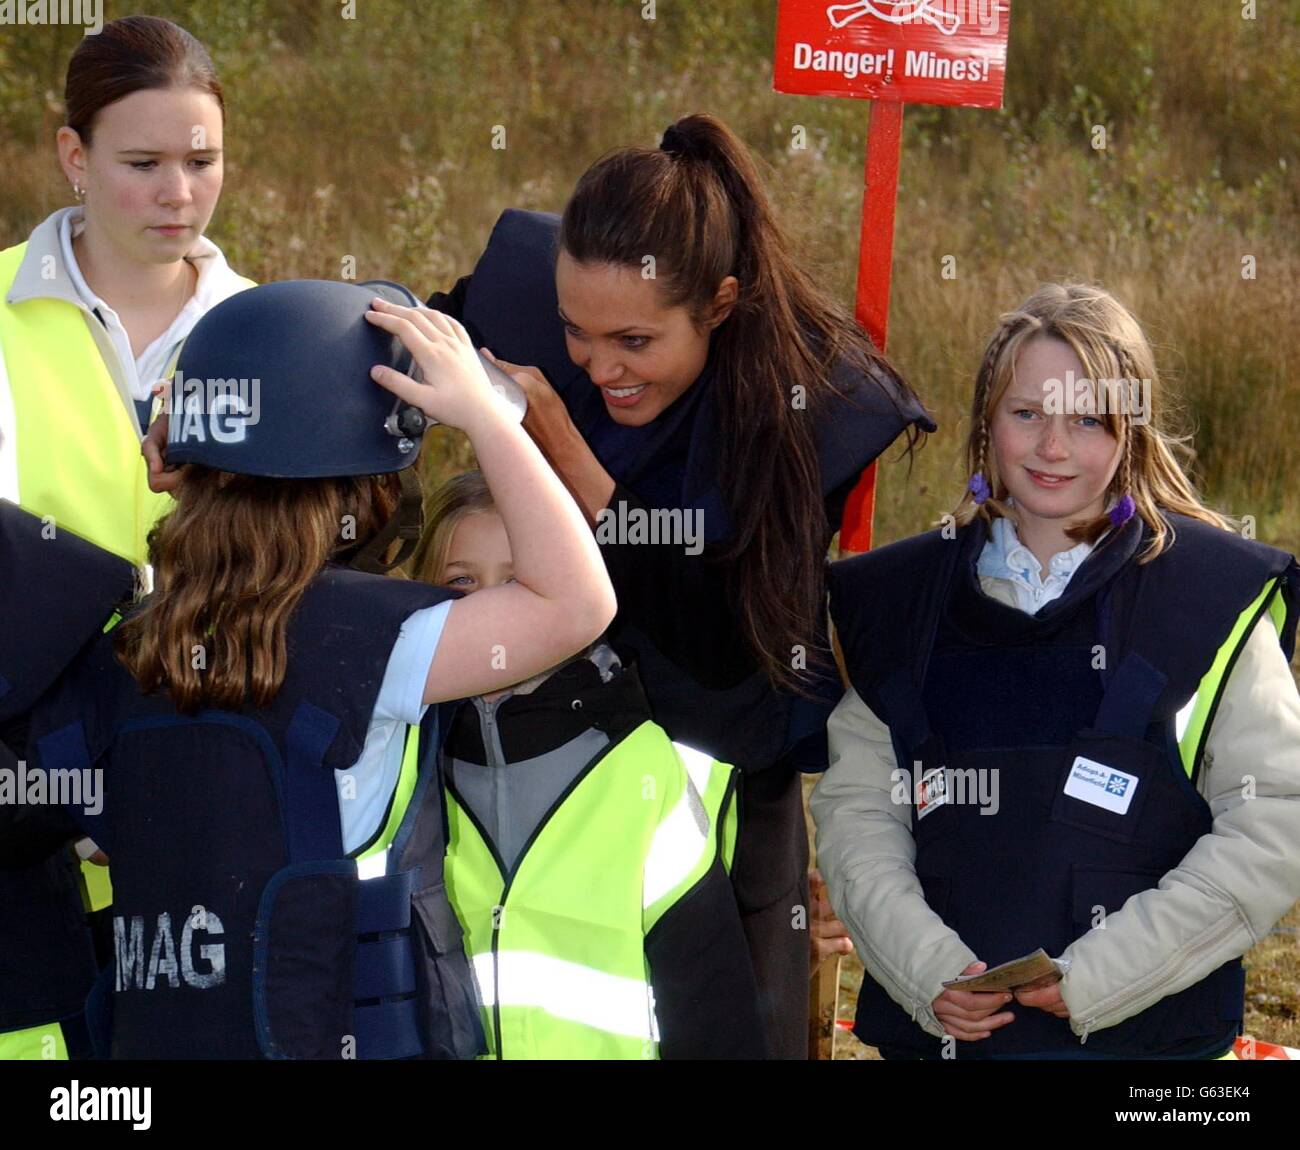 Angelina Jolie Minefield Banque D'Images